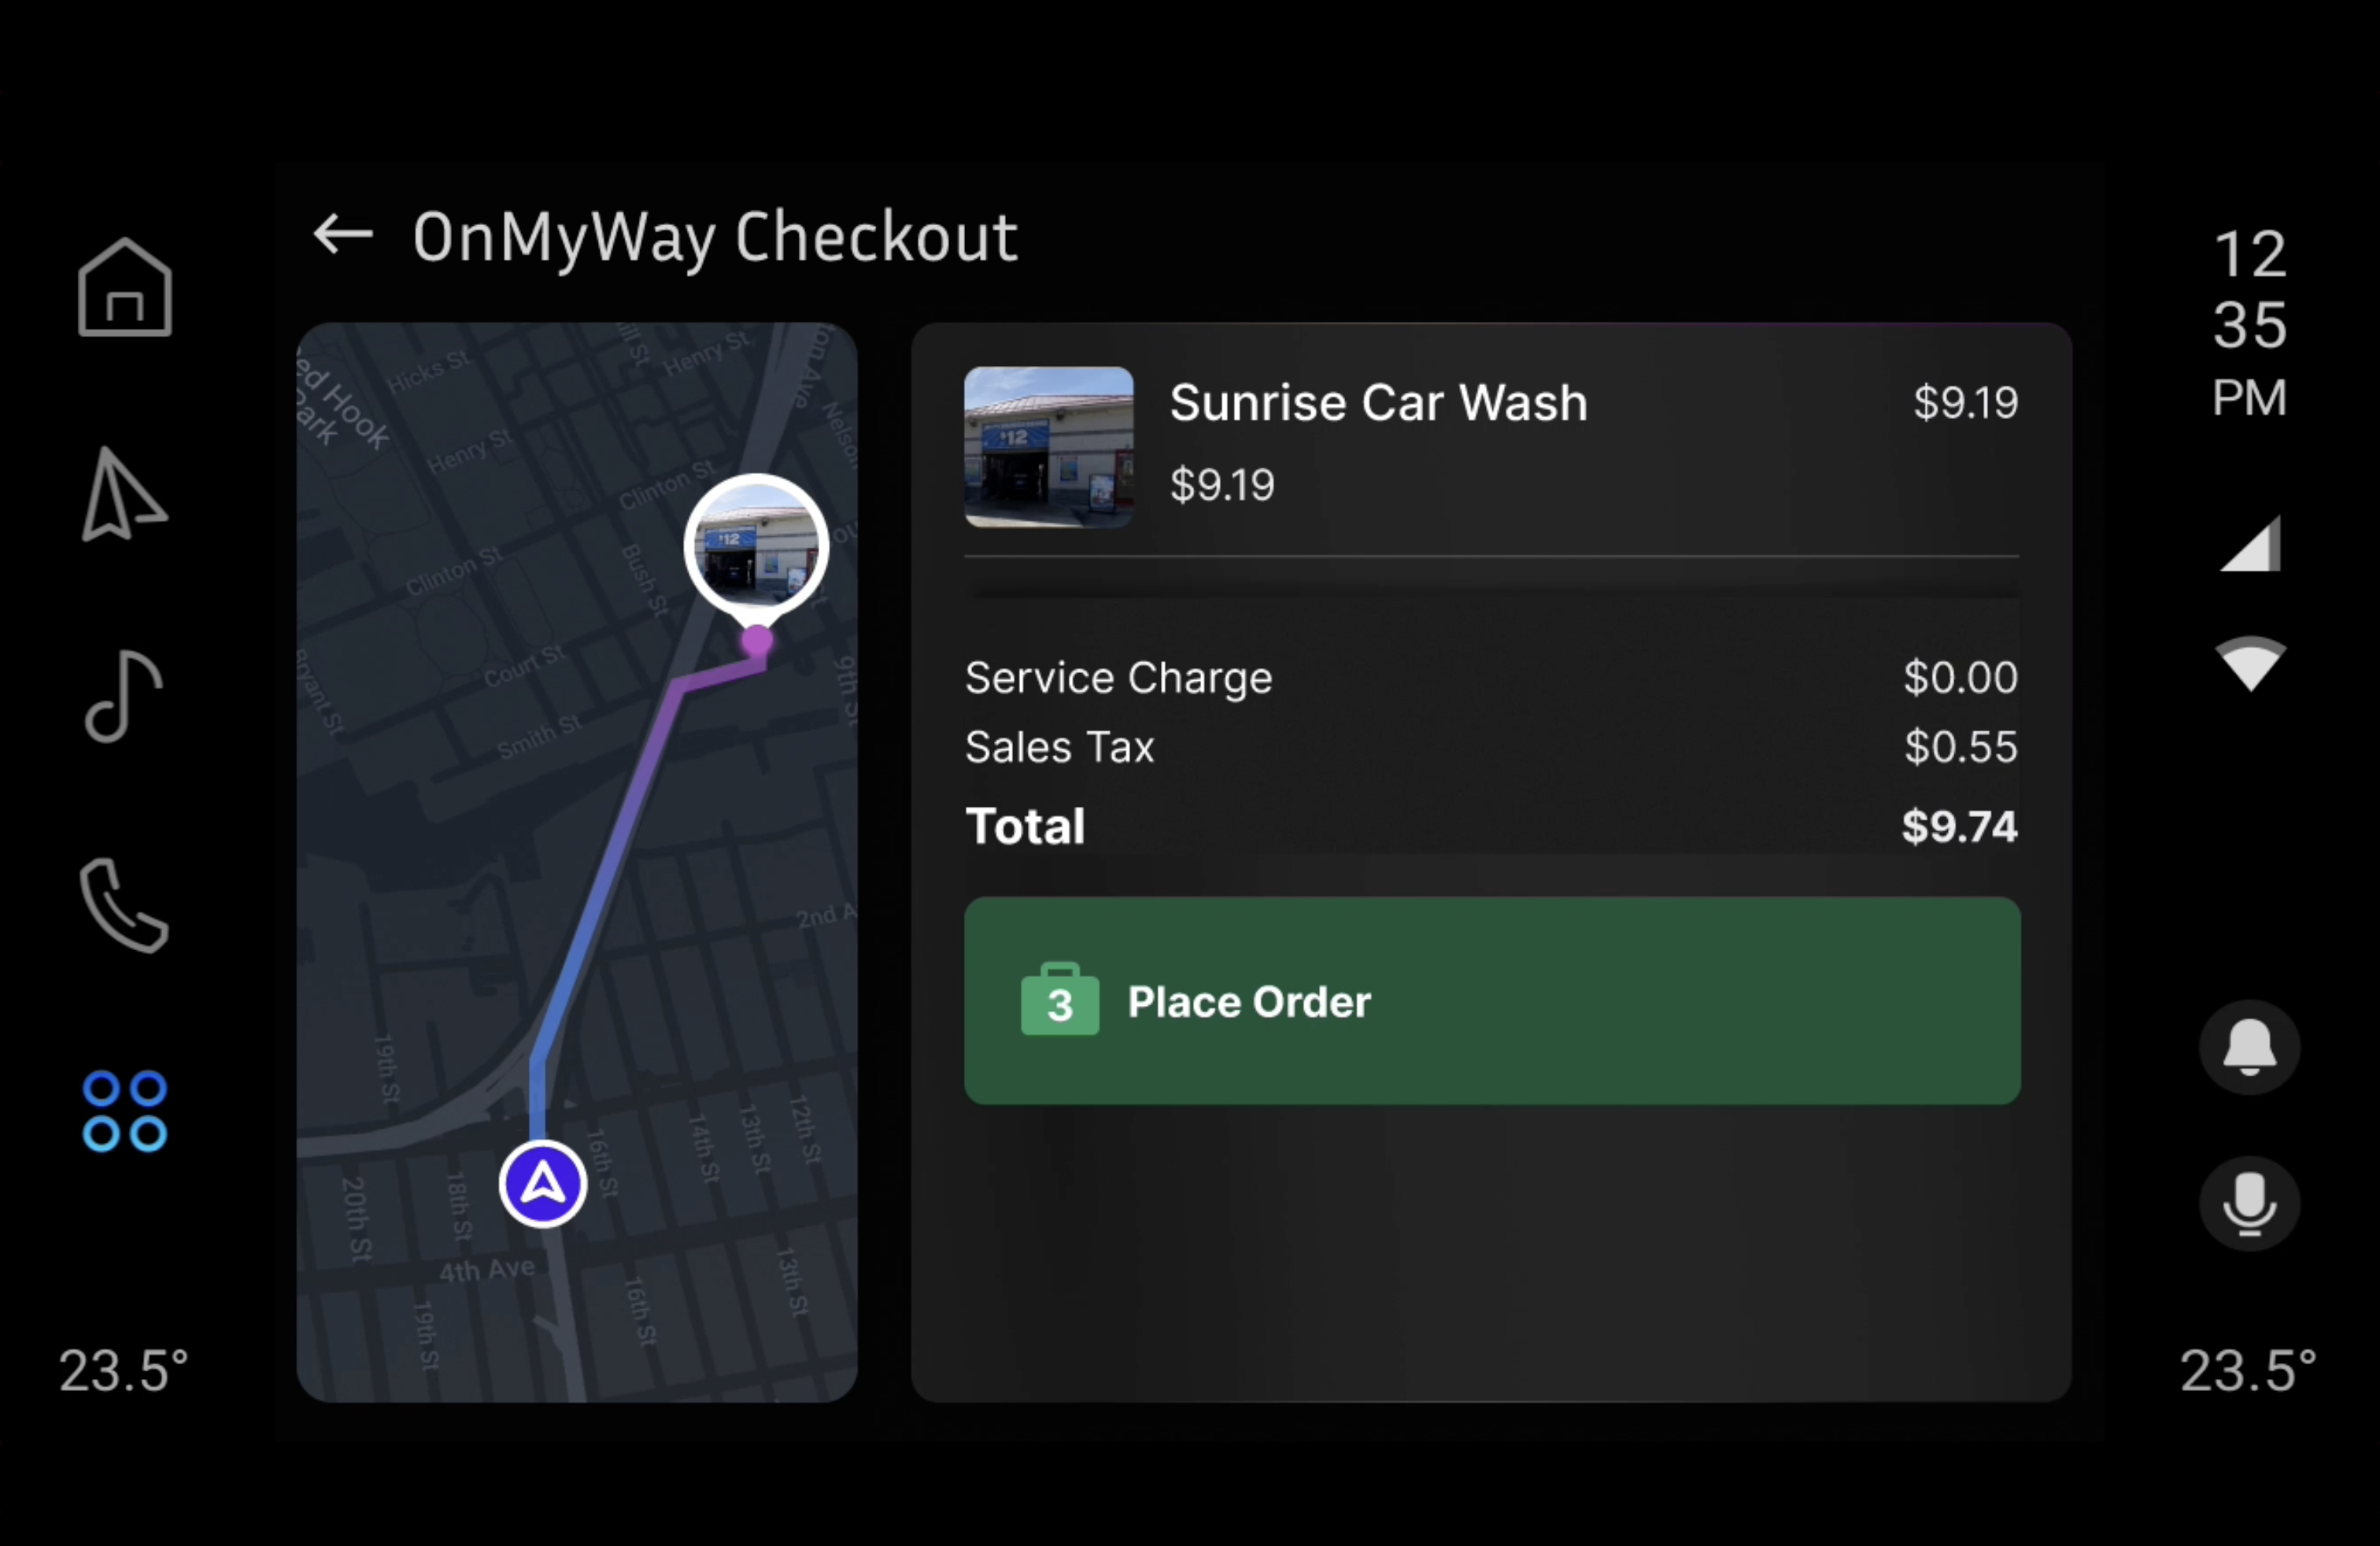 The OnMyWay™ in-car retail and commerce solution brings easy, low-distraction curated shopping to the dashboard of consumers’ favorite connected cars by  facilitating hands-free or dashboard ordering and payment, and then coordinating all logistics for a  seamless curbside experience.